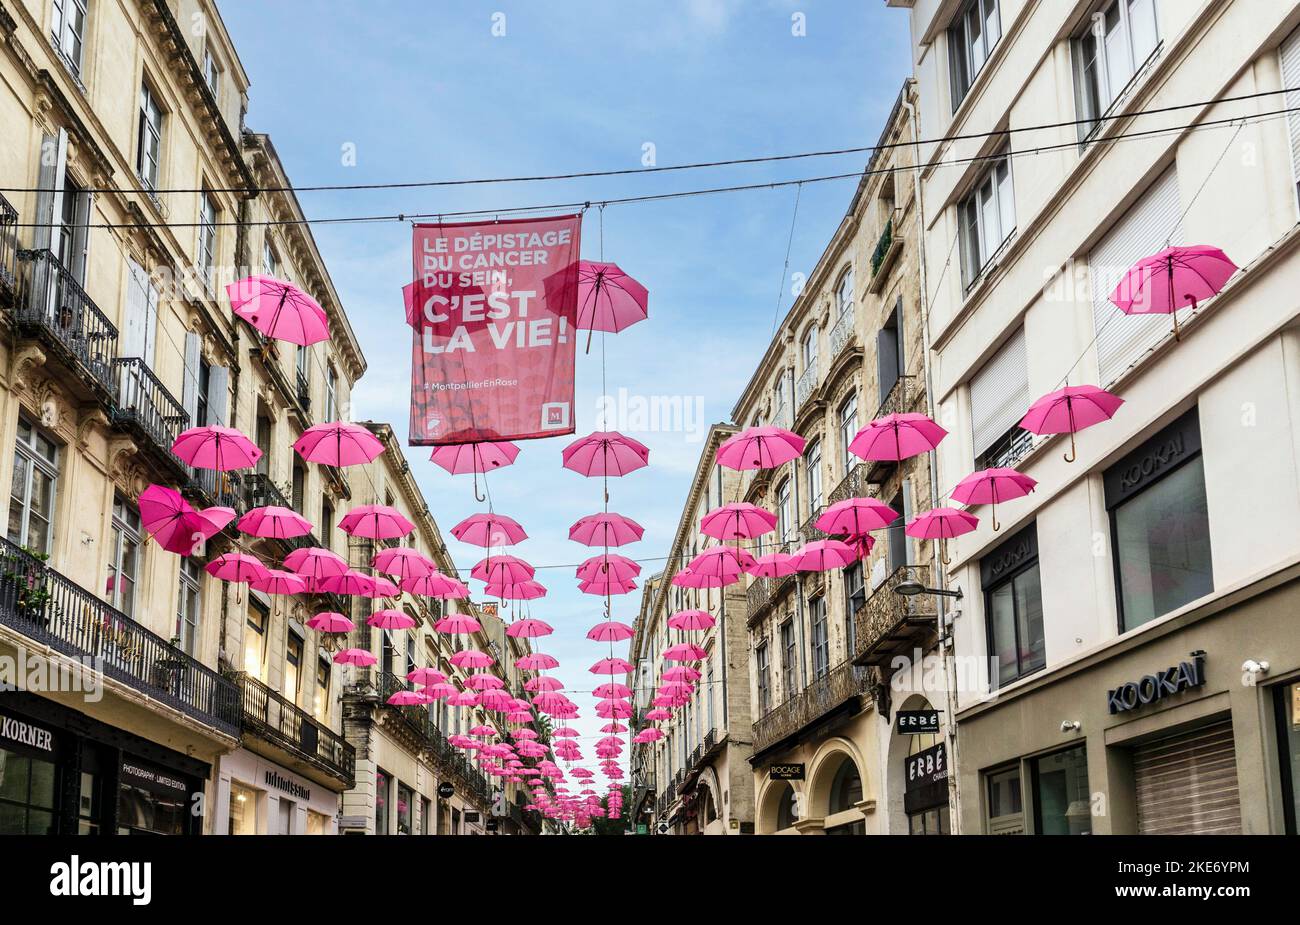 Dozens of pink umbrellas displayed in Montpelier, France to raise awareness of cancer screening. Stock Photo